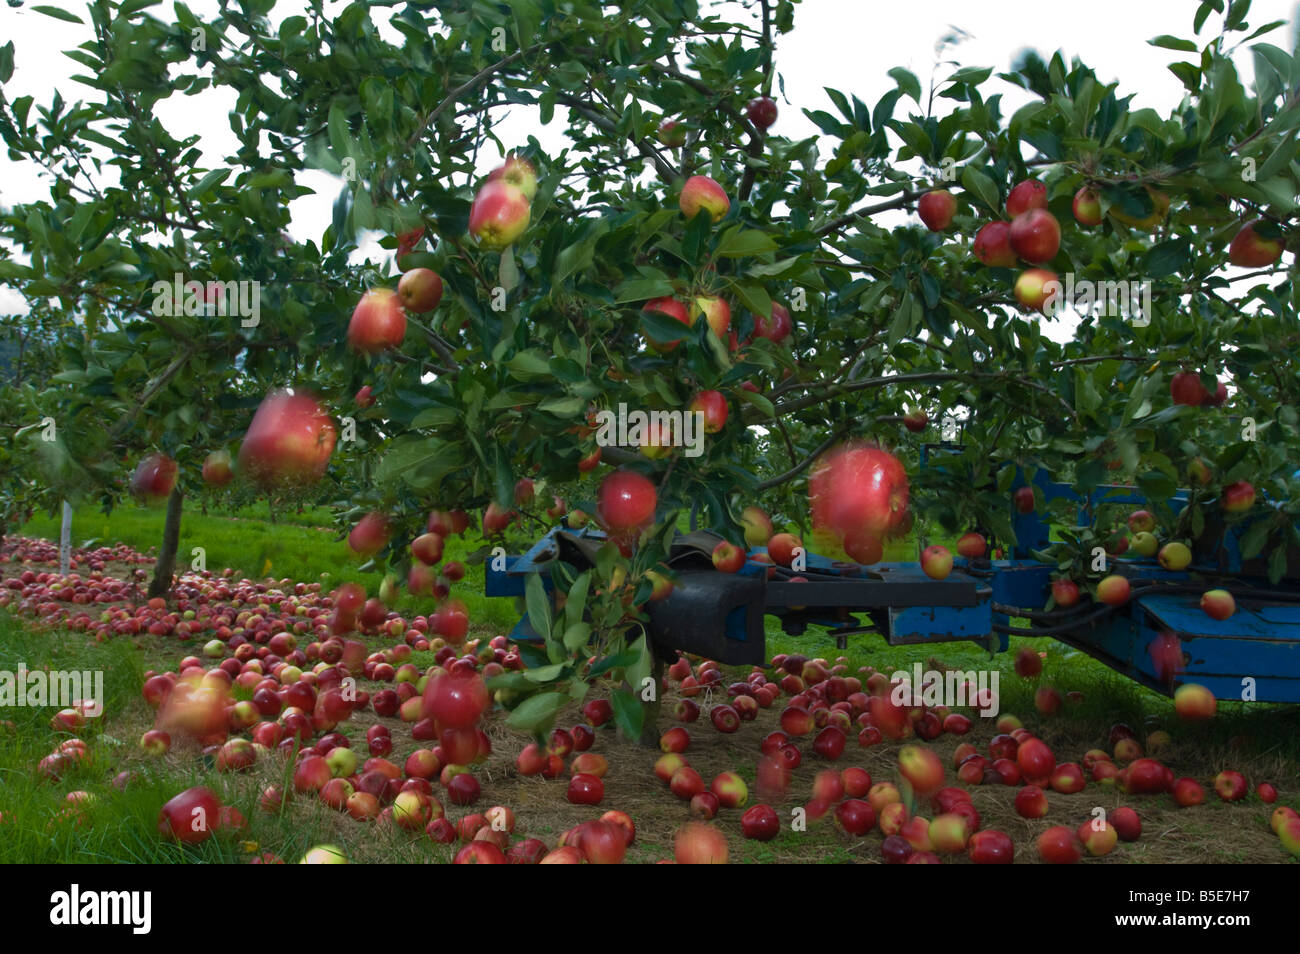 Machine harvesting Katy cider apples by shaking the trees Thatchers Cider Orchard Sandford Somerset England Stock Photo